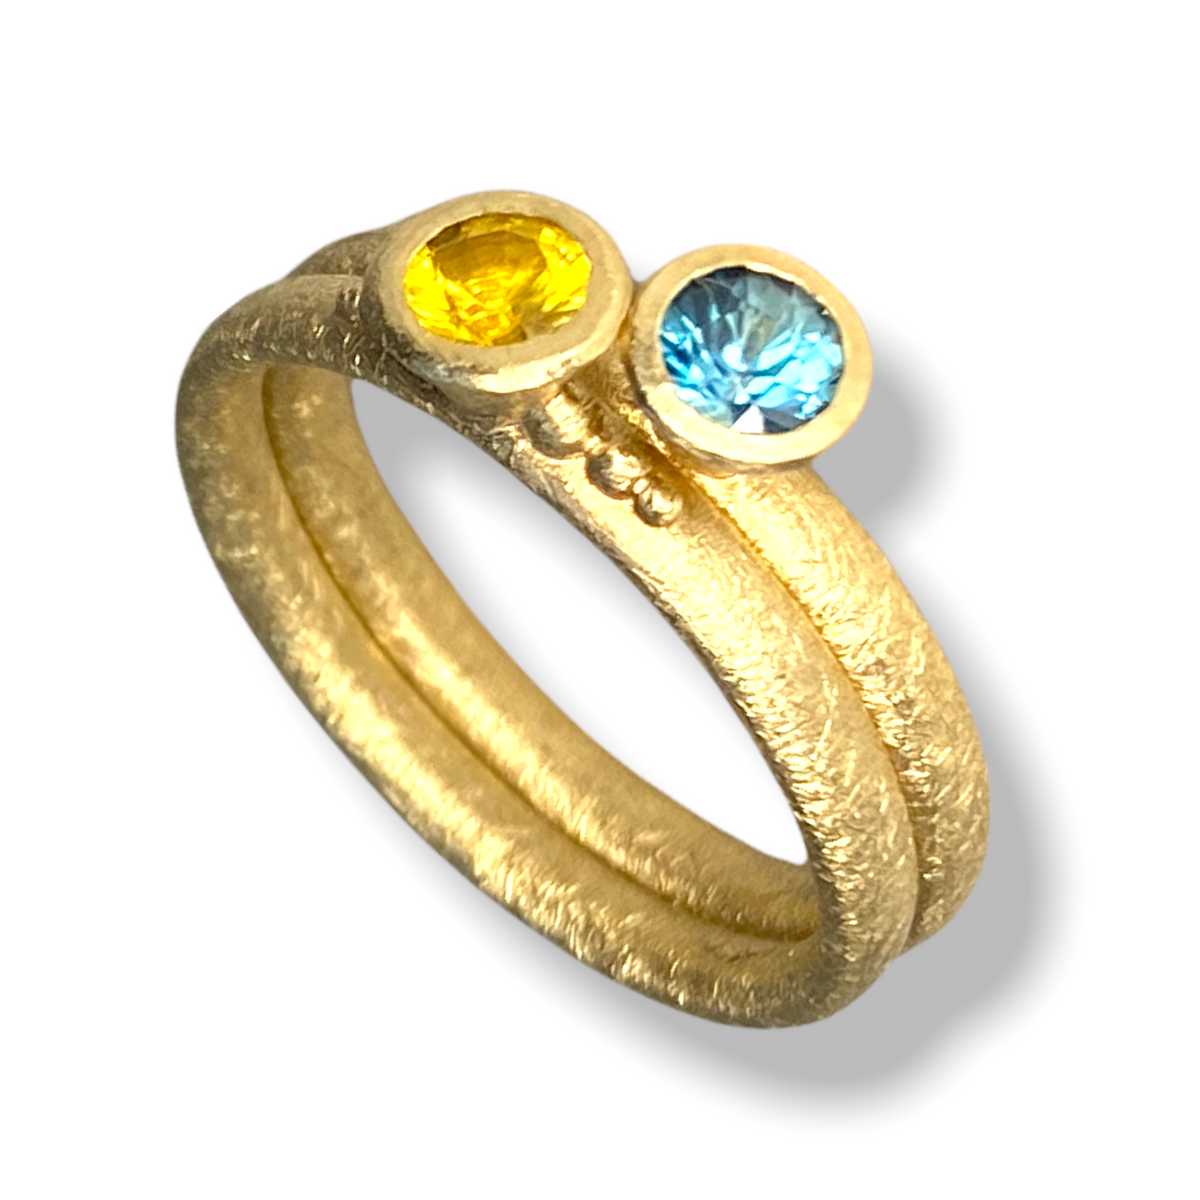 Sylvia Cone Shaped Stacker | Gold Stacking Ring With Granules | Choose Your Metal And Gemstones